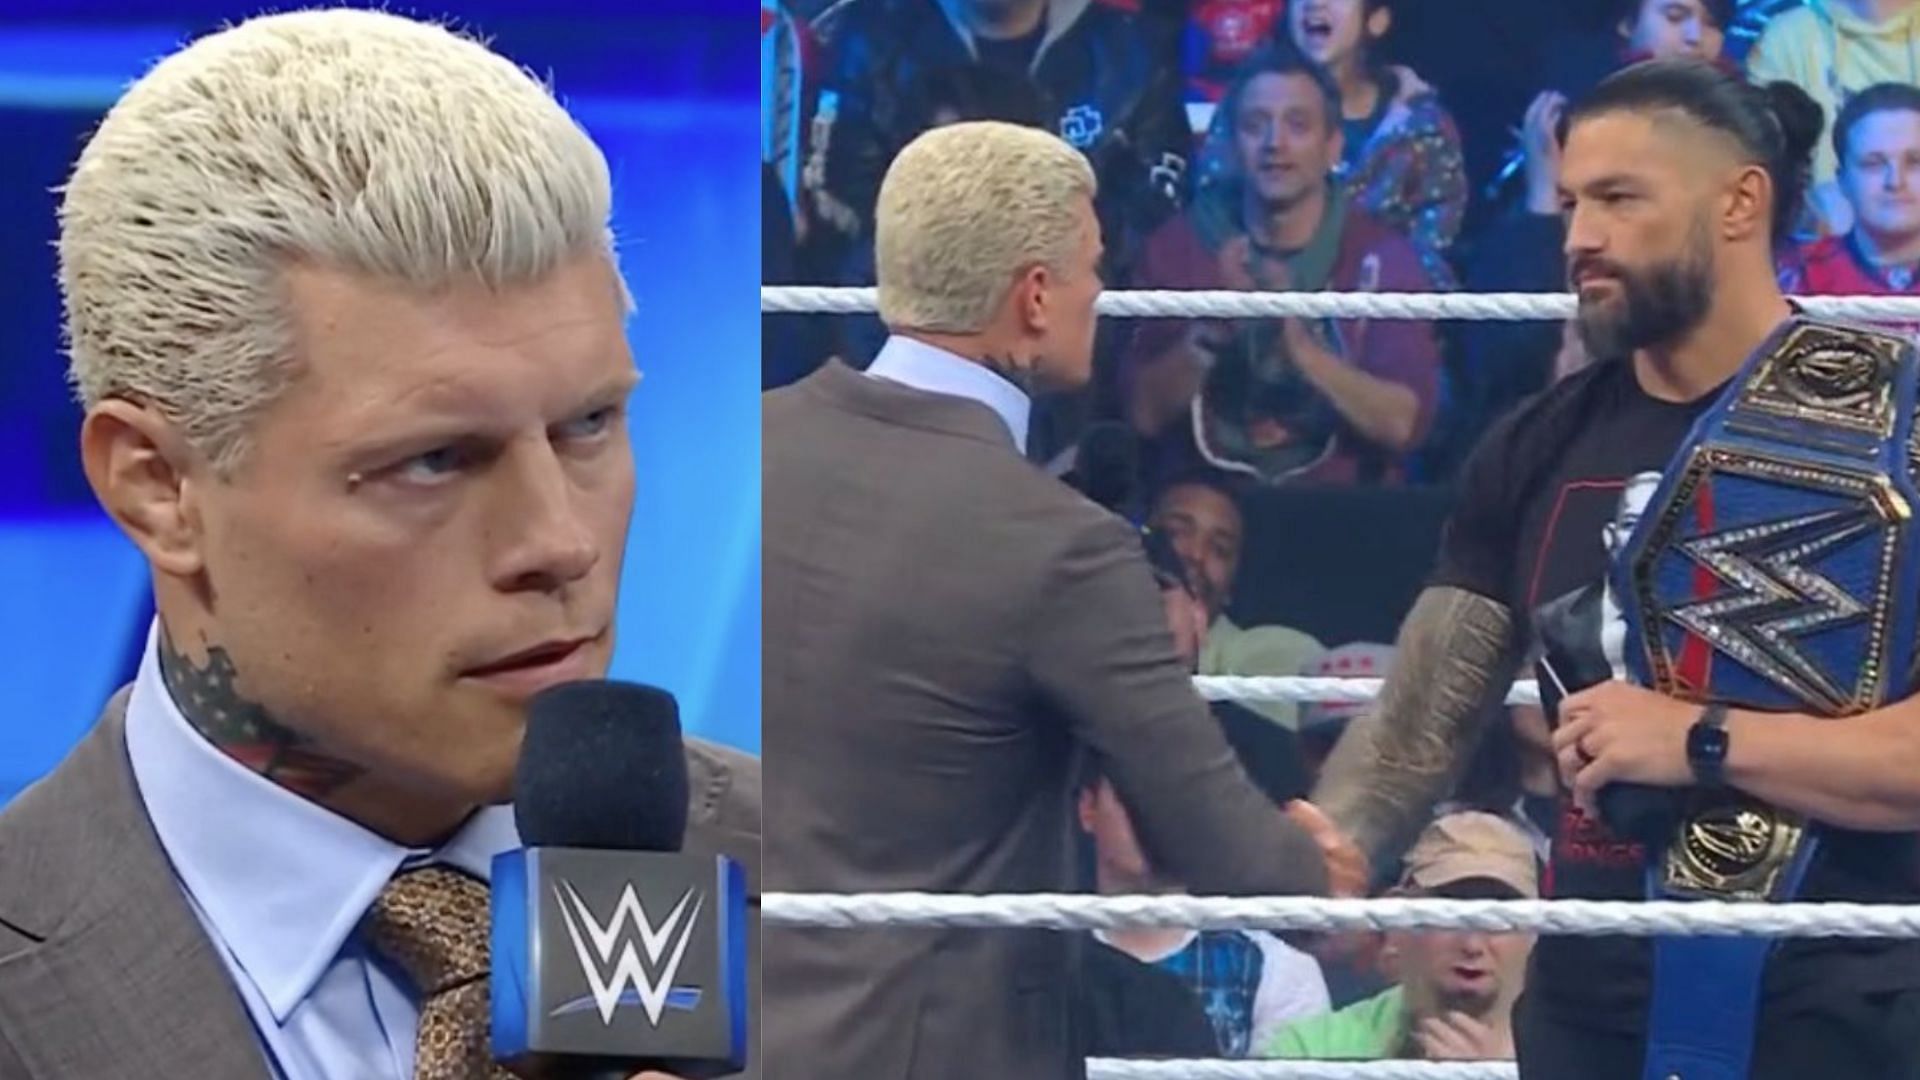 Cody Rhodes and Roman Reigns met face-to-face on WWE SmackDown.